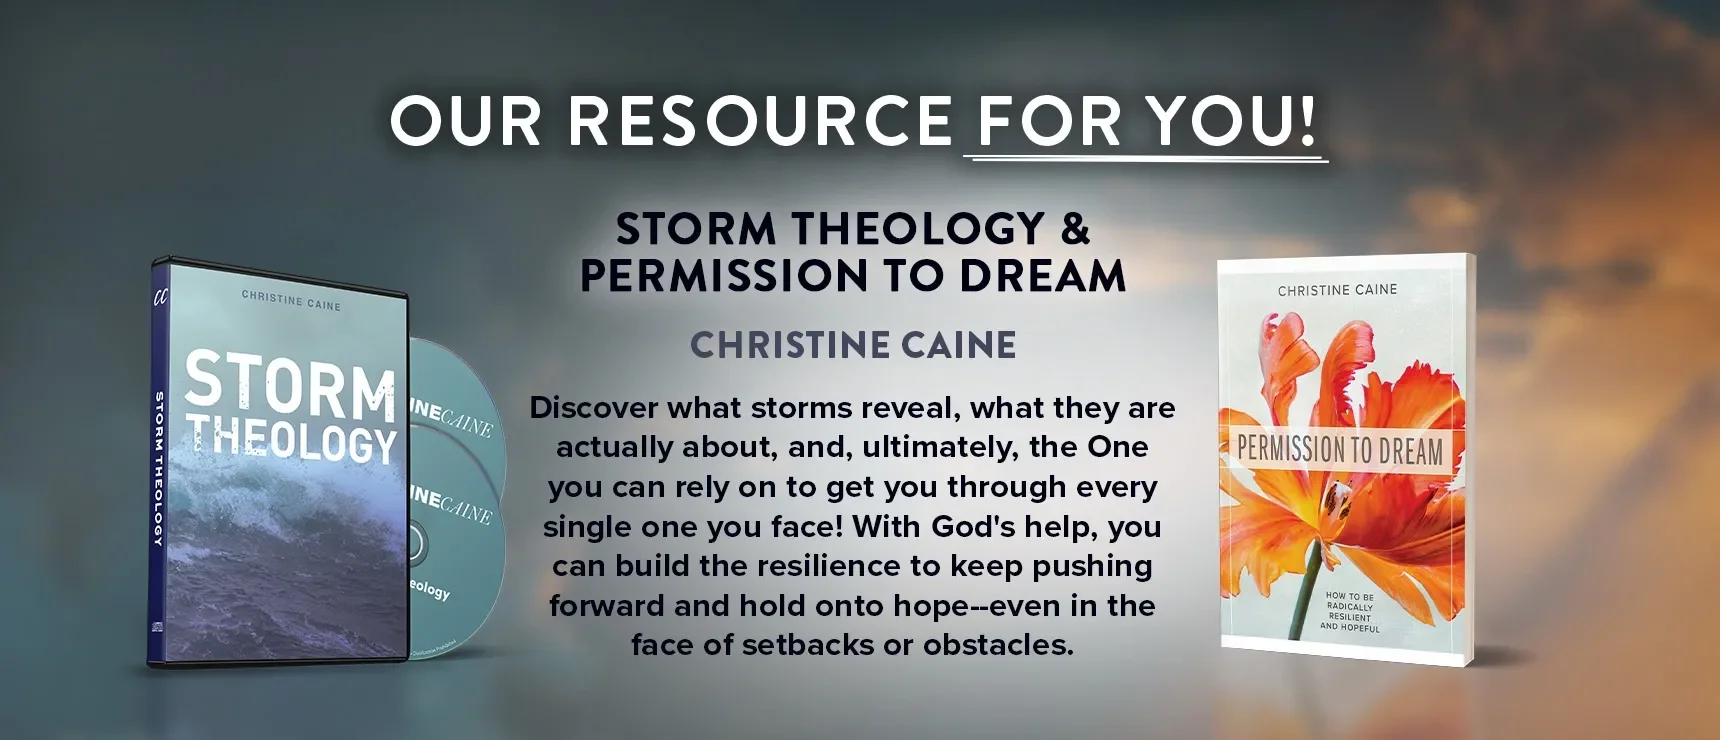 Storm Theology + Permission to Dream by Christine Caine